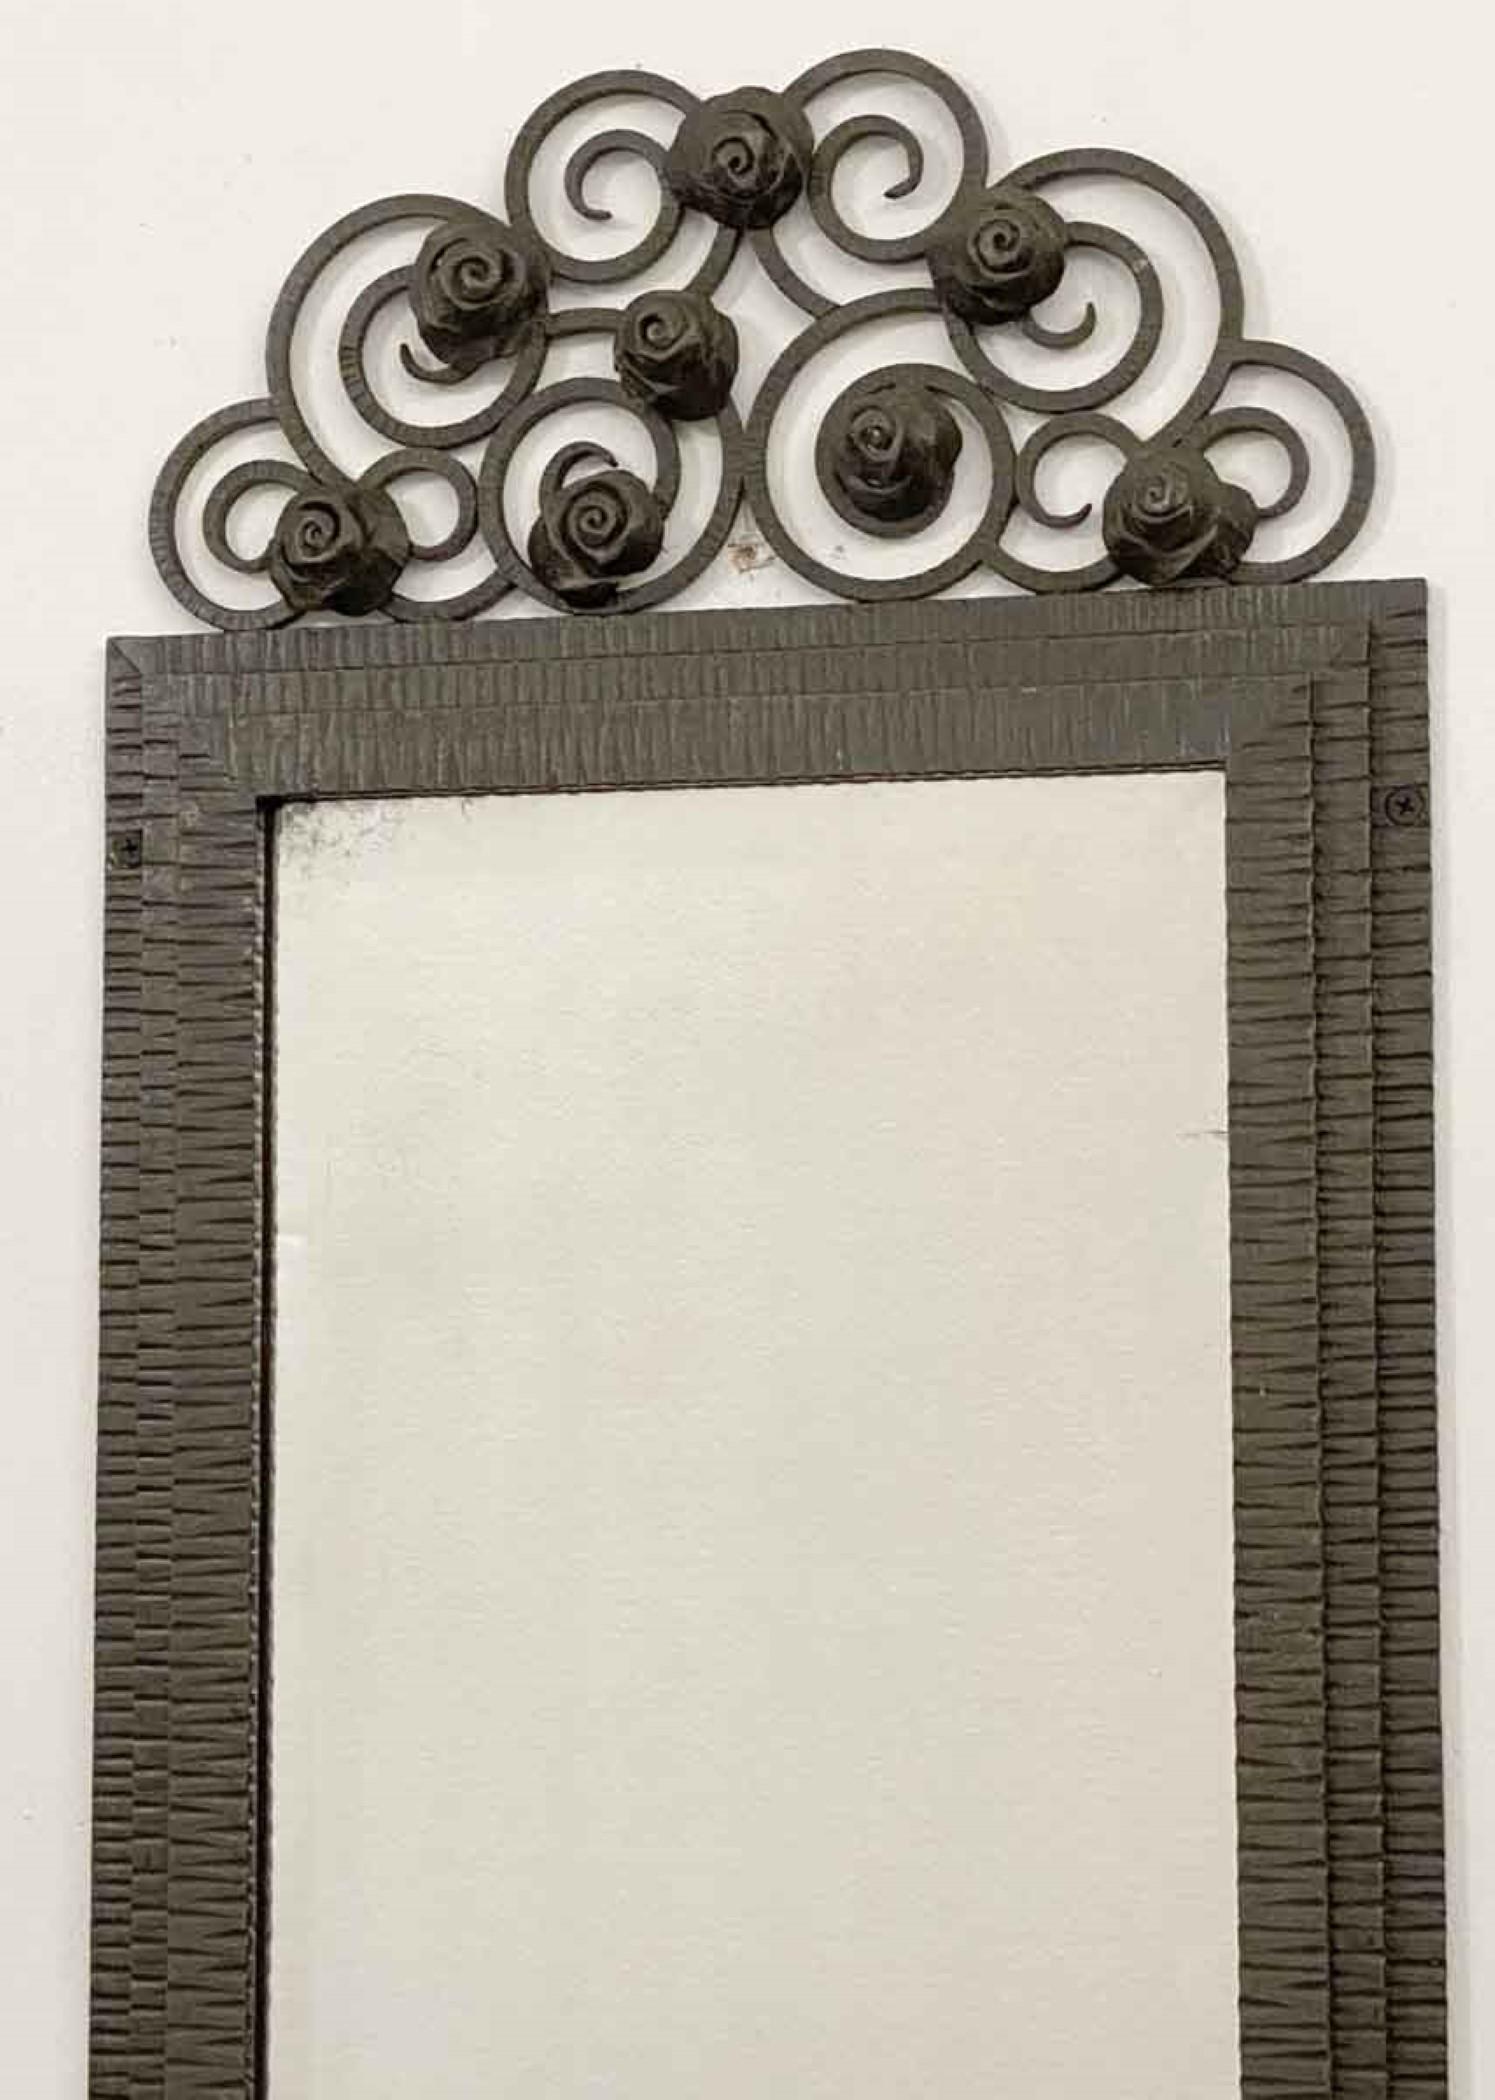 1930s French Art Deco beveled mirror in an original iron frame. Features floral top design. The original glass was resilvered and show signs of its age with some distressing and minor scratches. This can be seen at our 333 West 52nd St location in